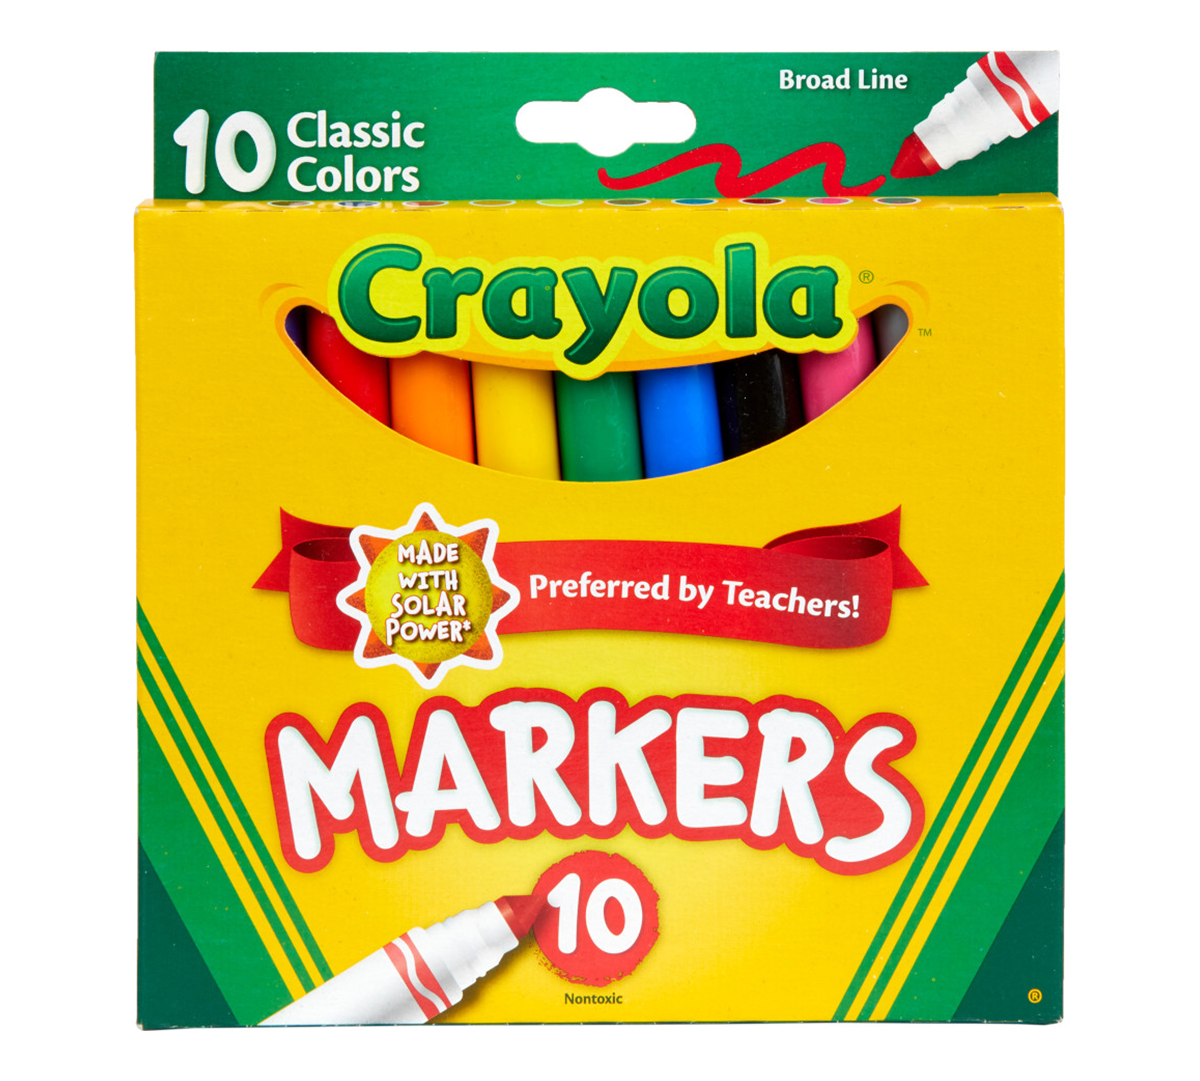 Case of 24 Classic Colors 10 Each Crayola 758114552570 Broad Line Markers Count Pack of 24 